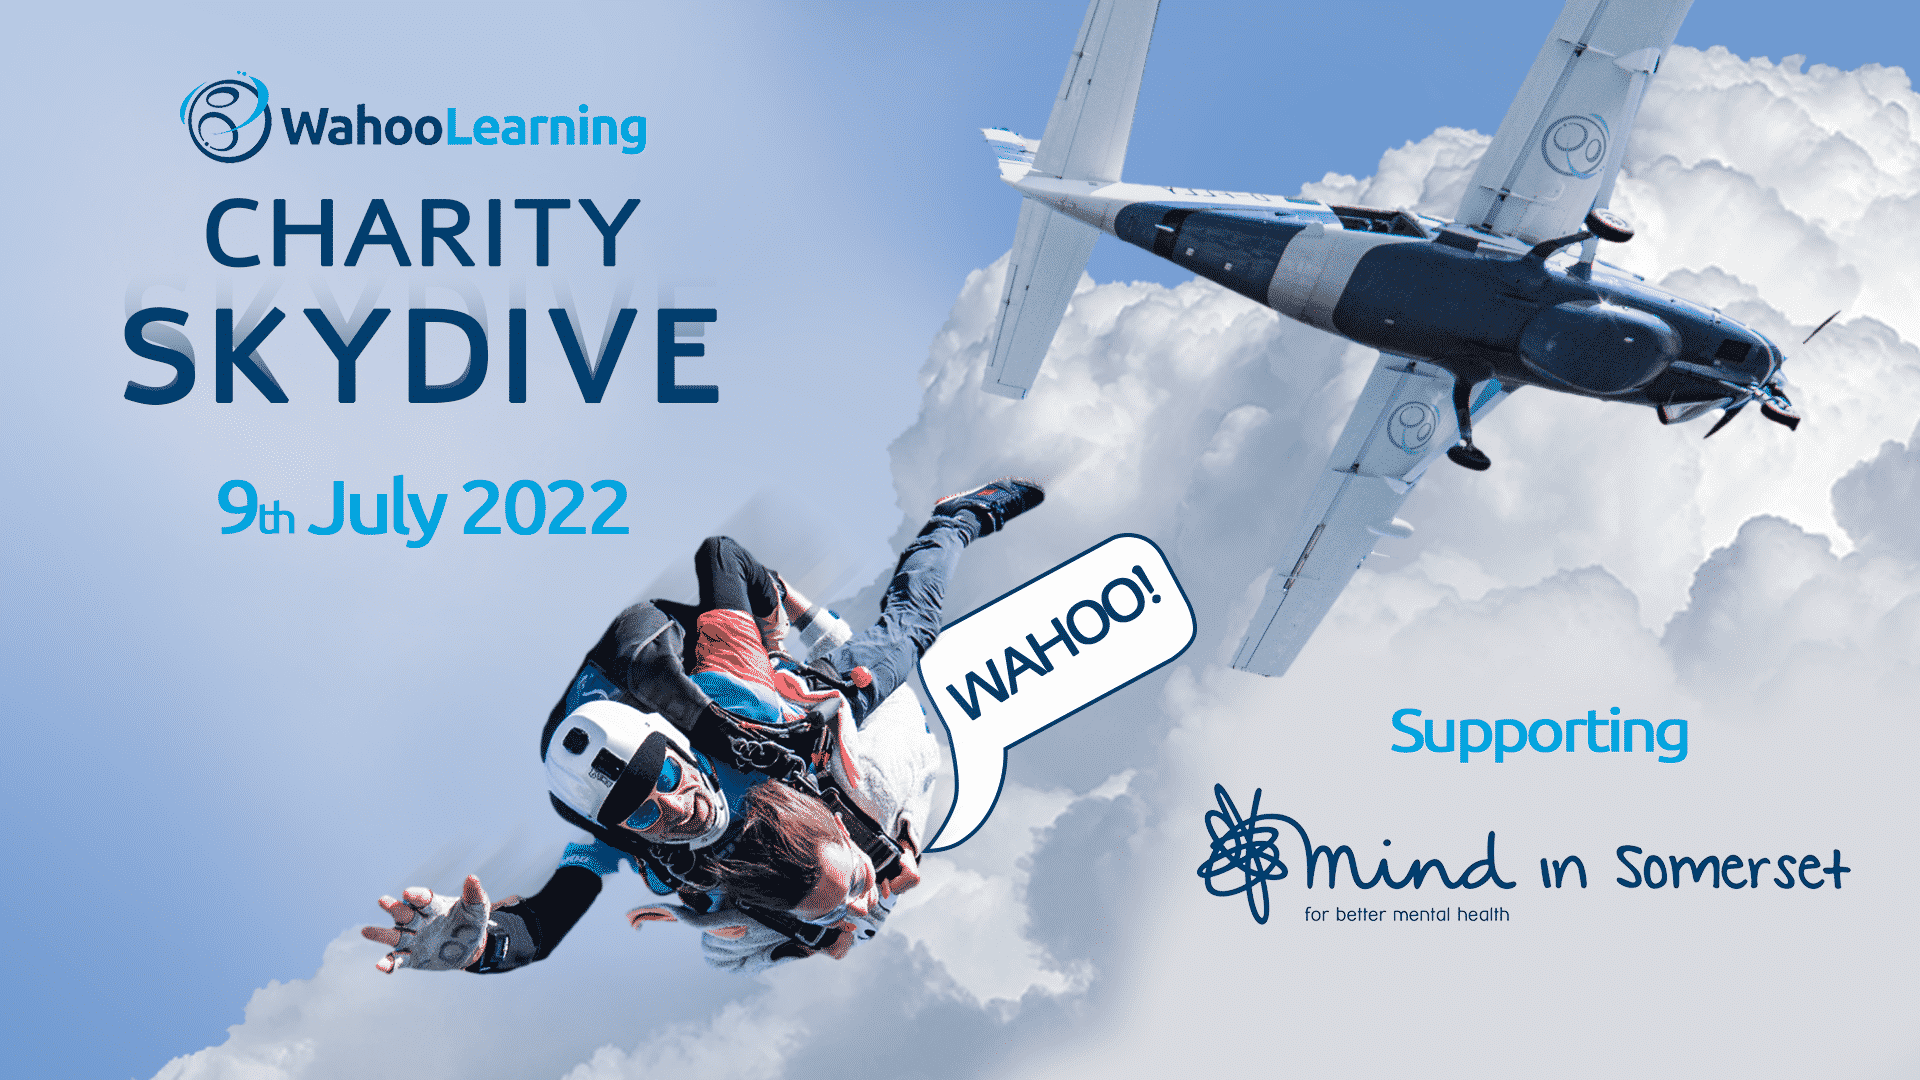 Skydive in support of mind in somerset